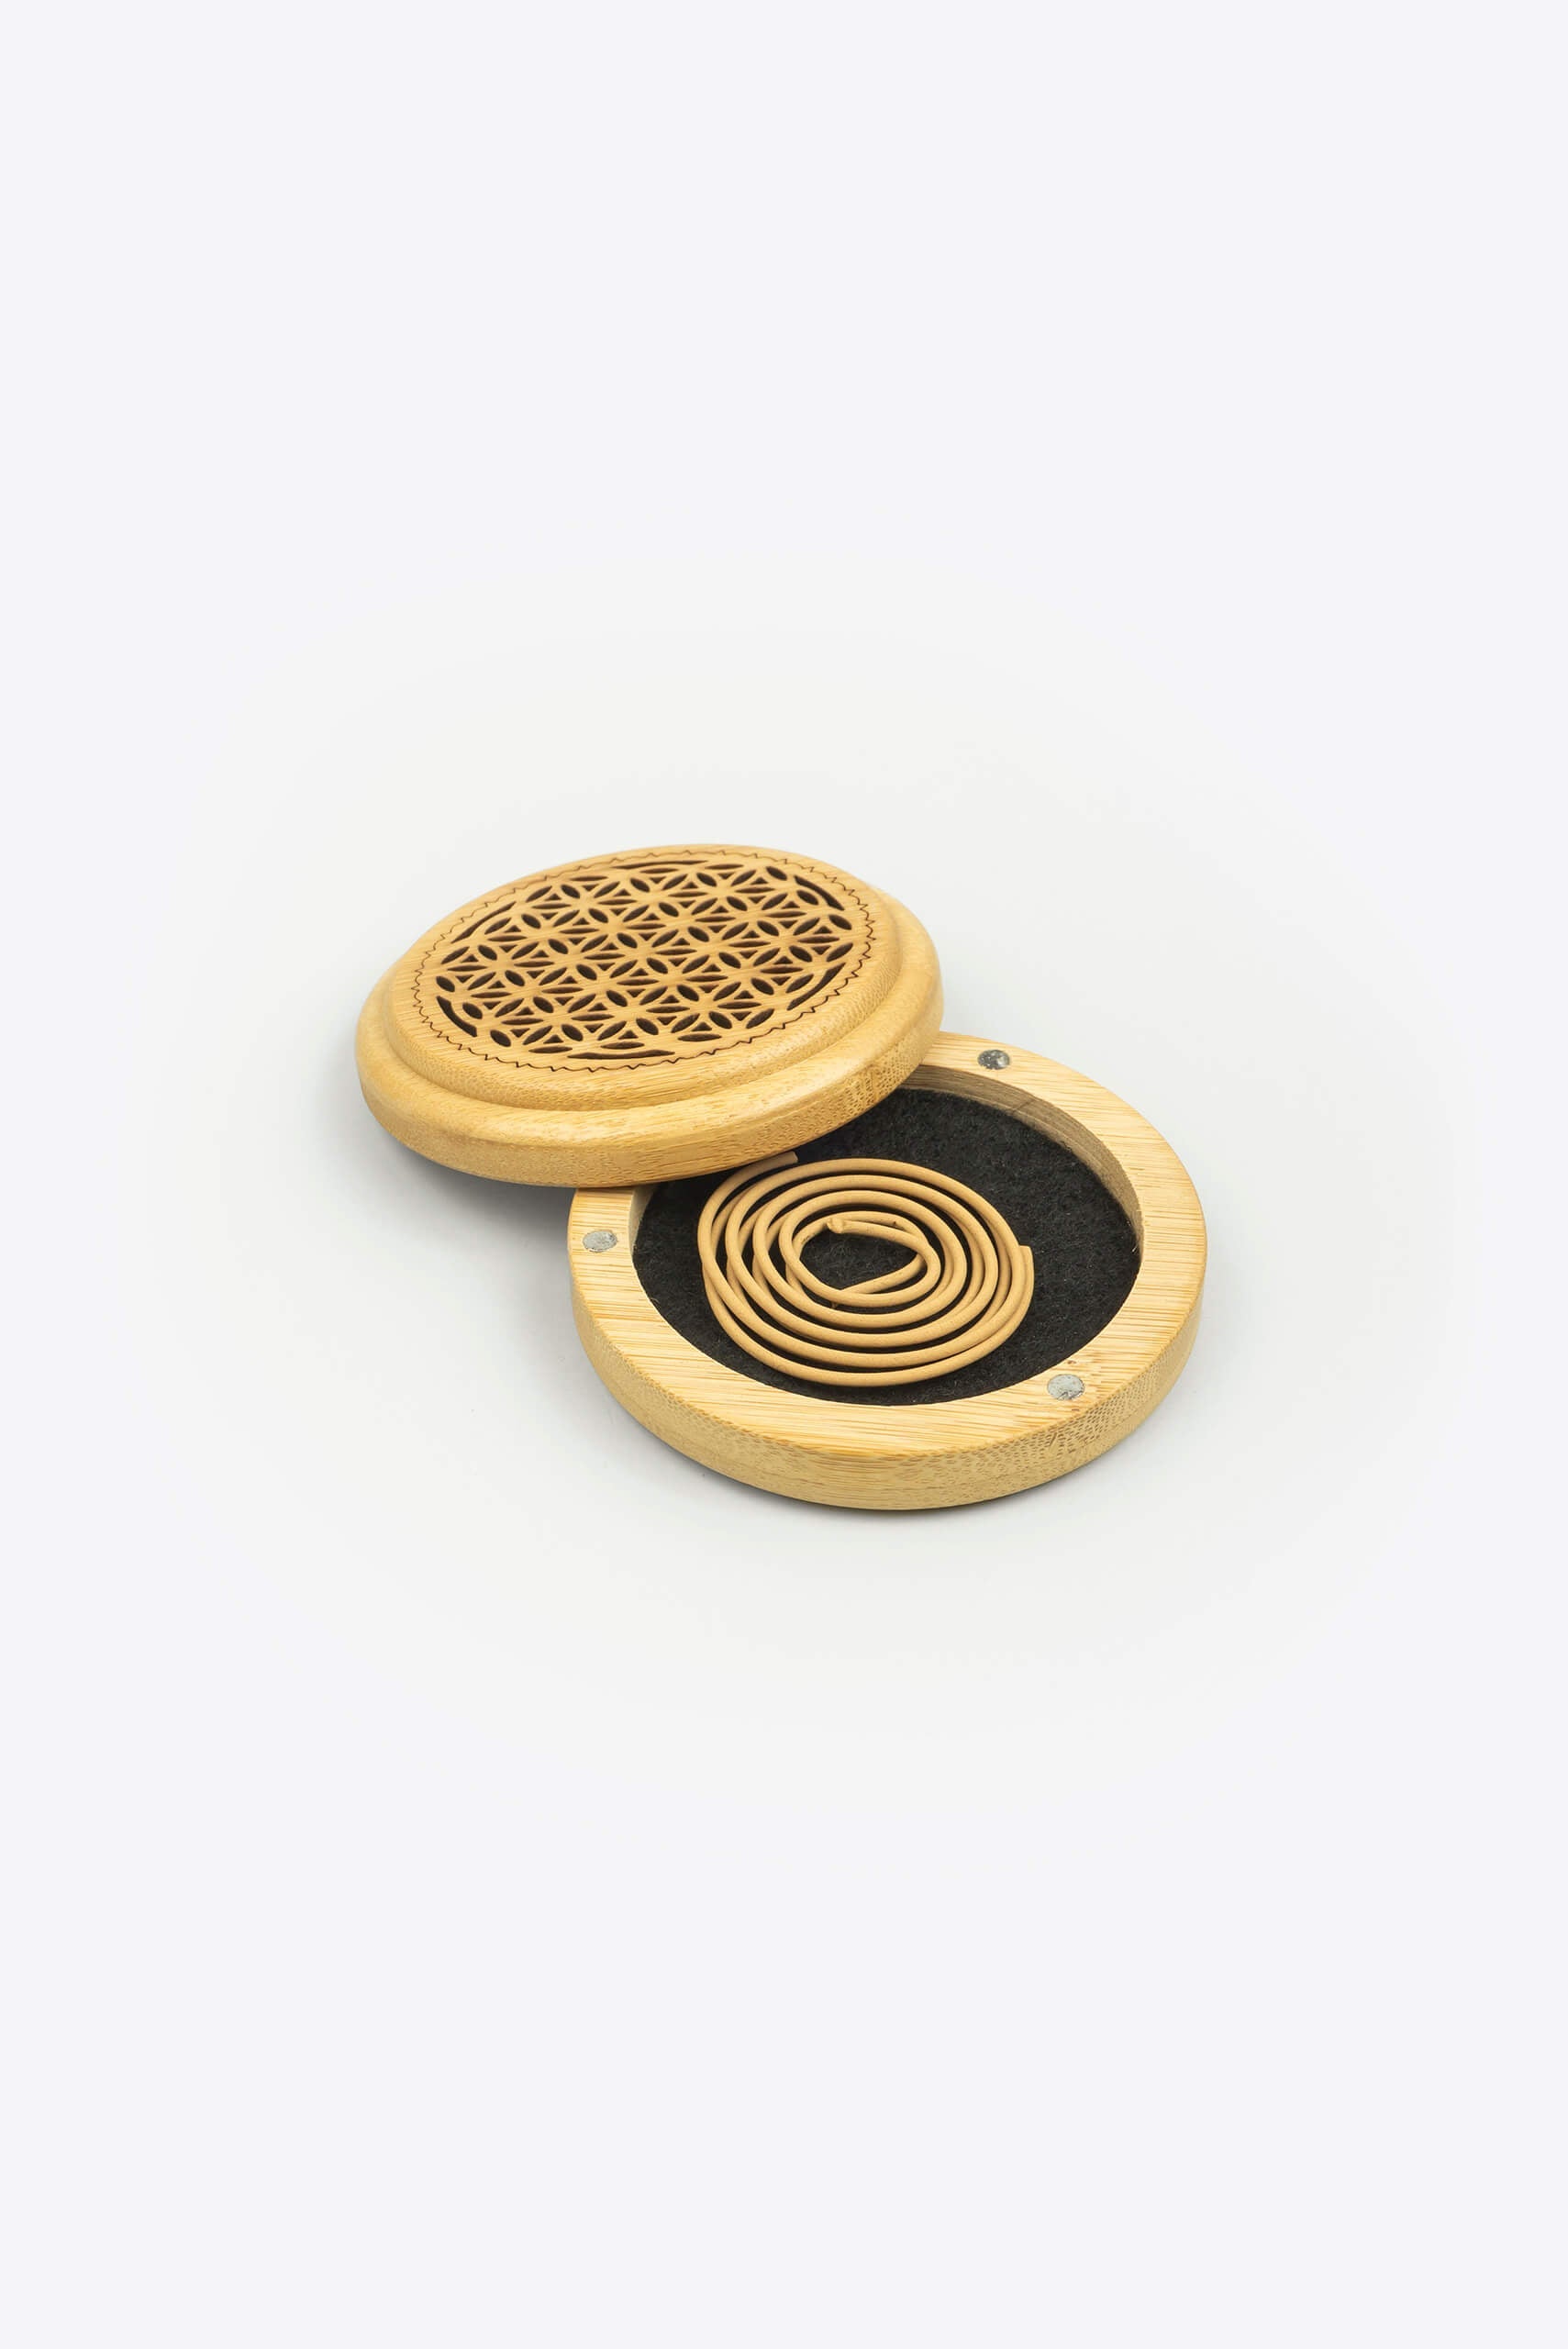 Wooden Coil Incense Box - Incense - Muslim Lifestyle Store